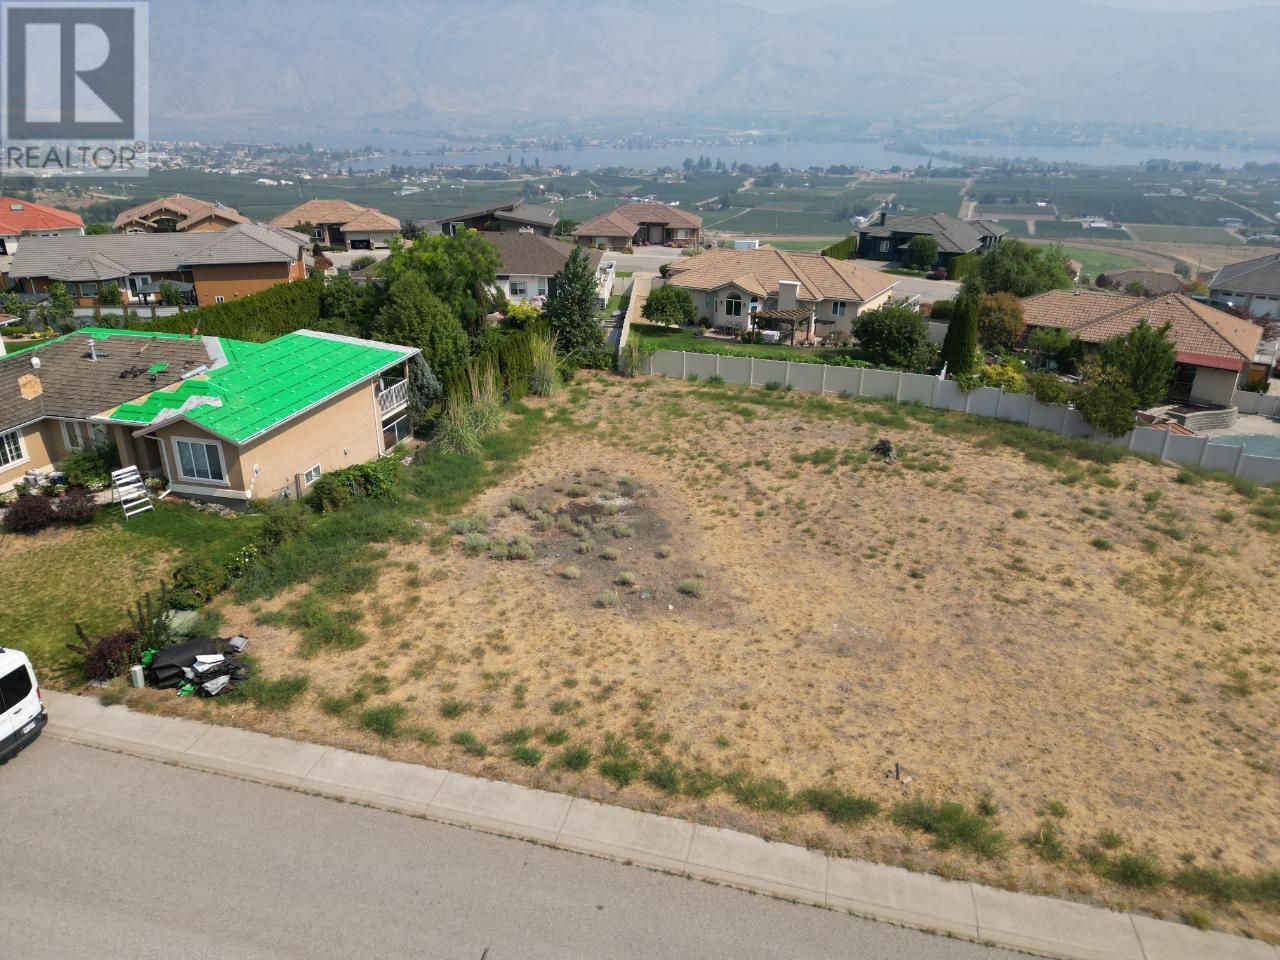 Main Photo: 3623 CYPRESS HILLS Drive, in Osoyoos: Vacant Land for sale : MLS®# 200892